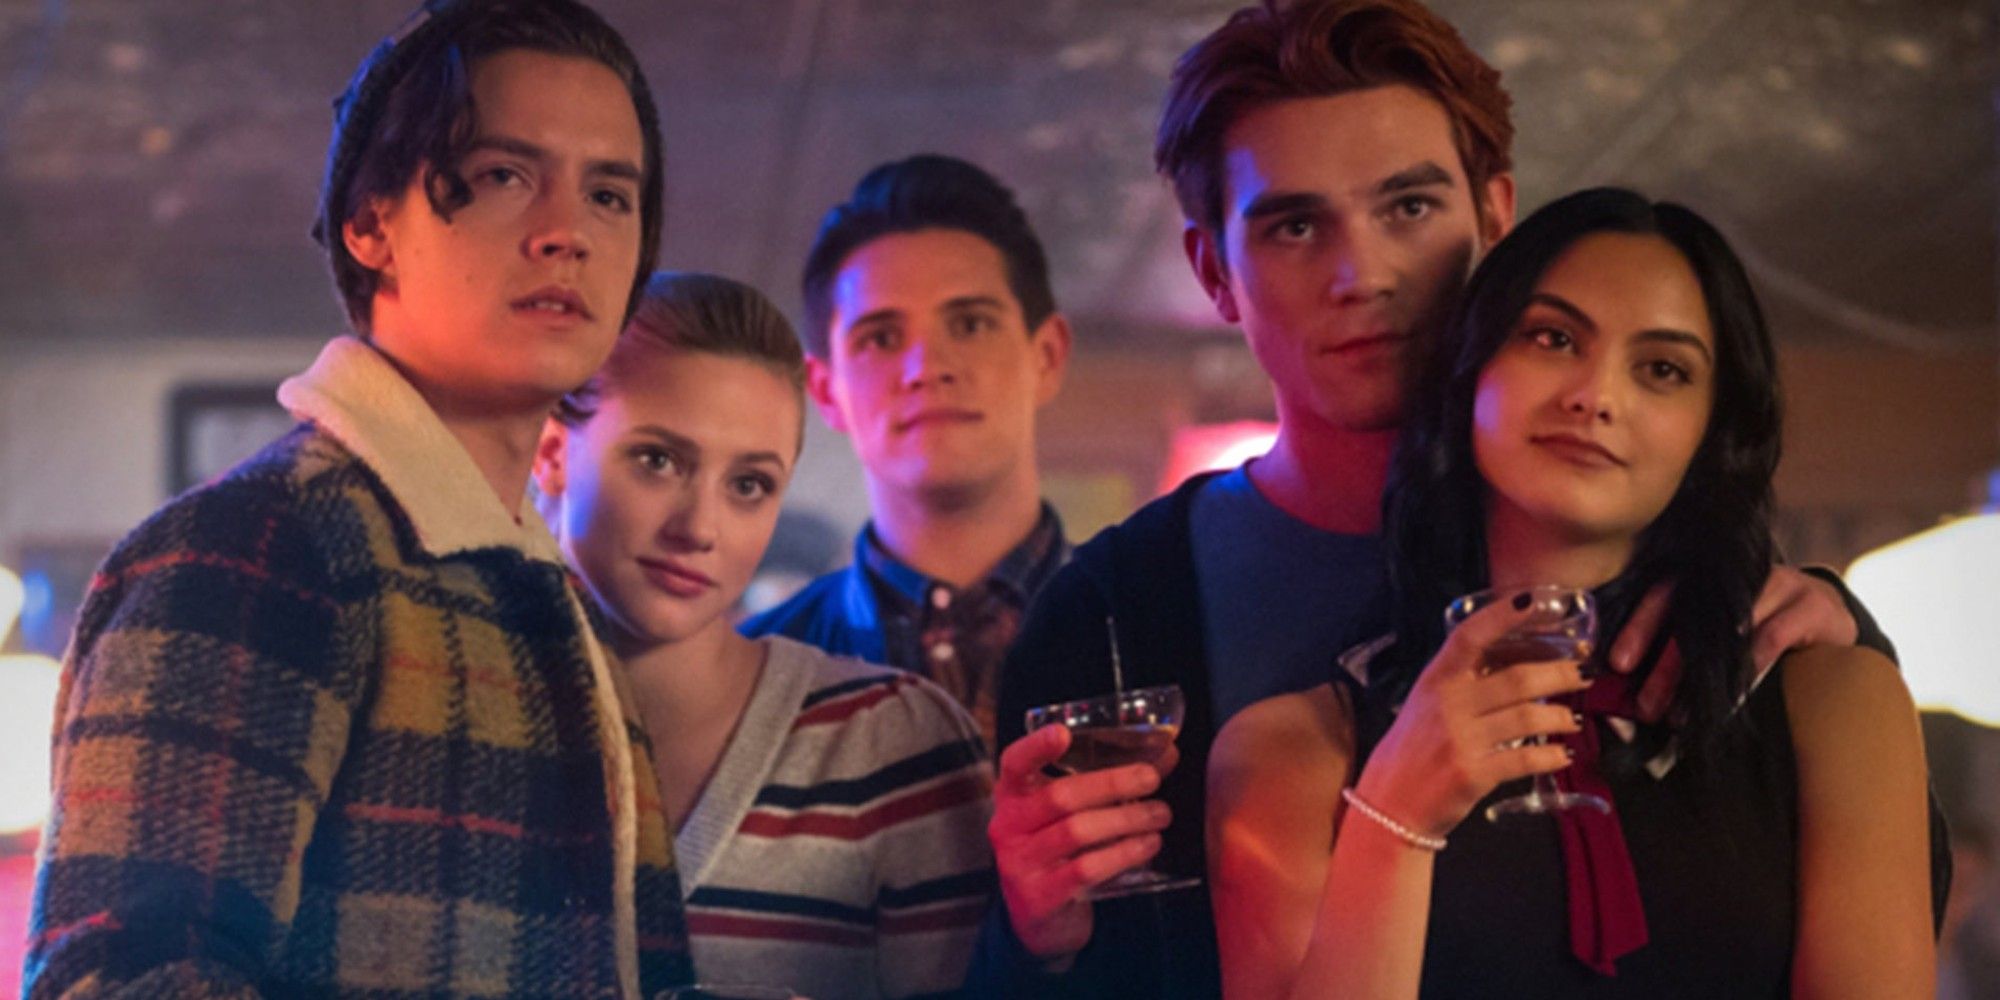 Riverdale Cole Sprouse Lili Reinhart Casey Colt KJ Apa and Camila Mendes as Jughead Jones Betty Cooper Kevin Keller Archie Andrews and Veronica Lodge